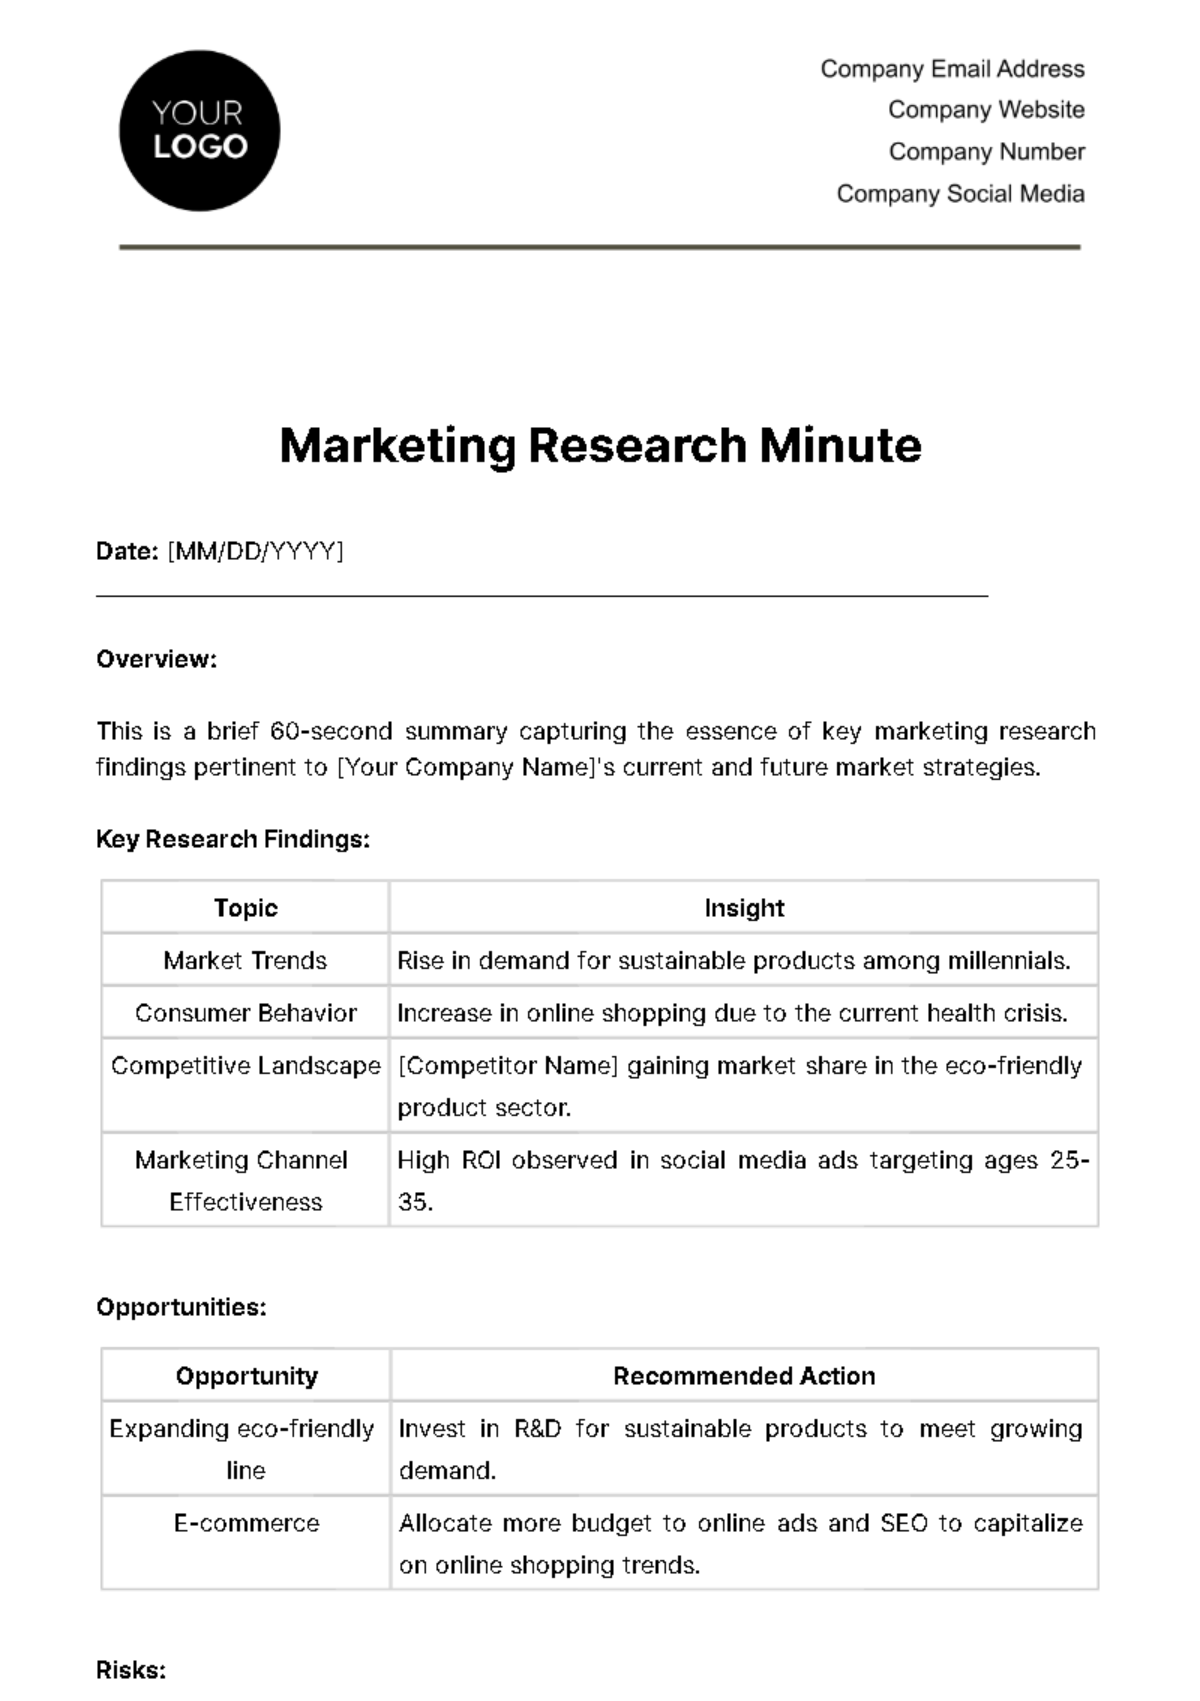 Marketing Research Minute Template